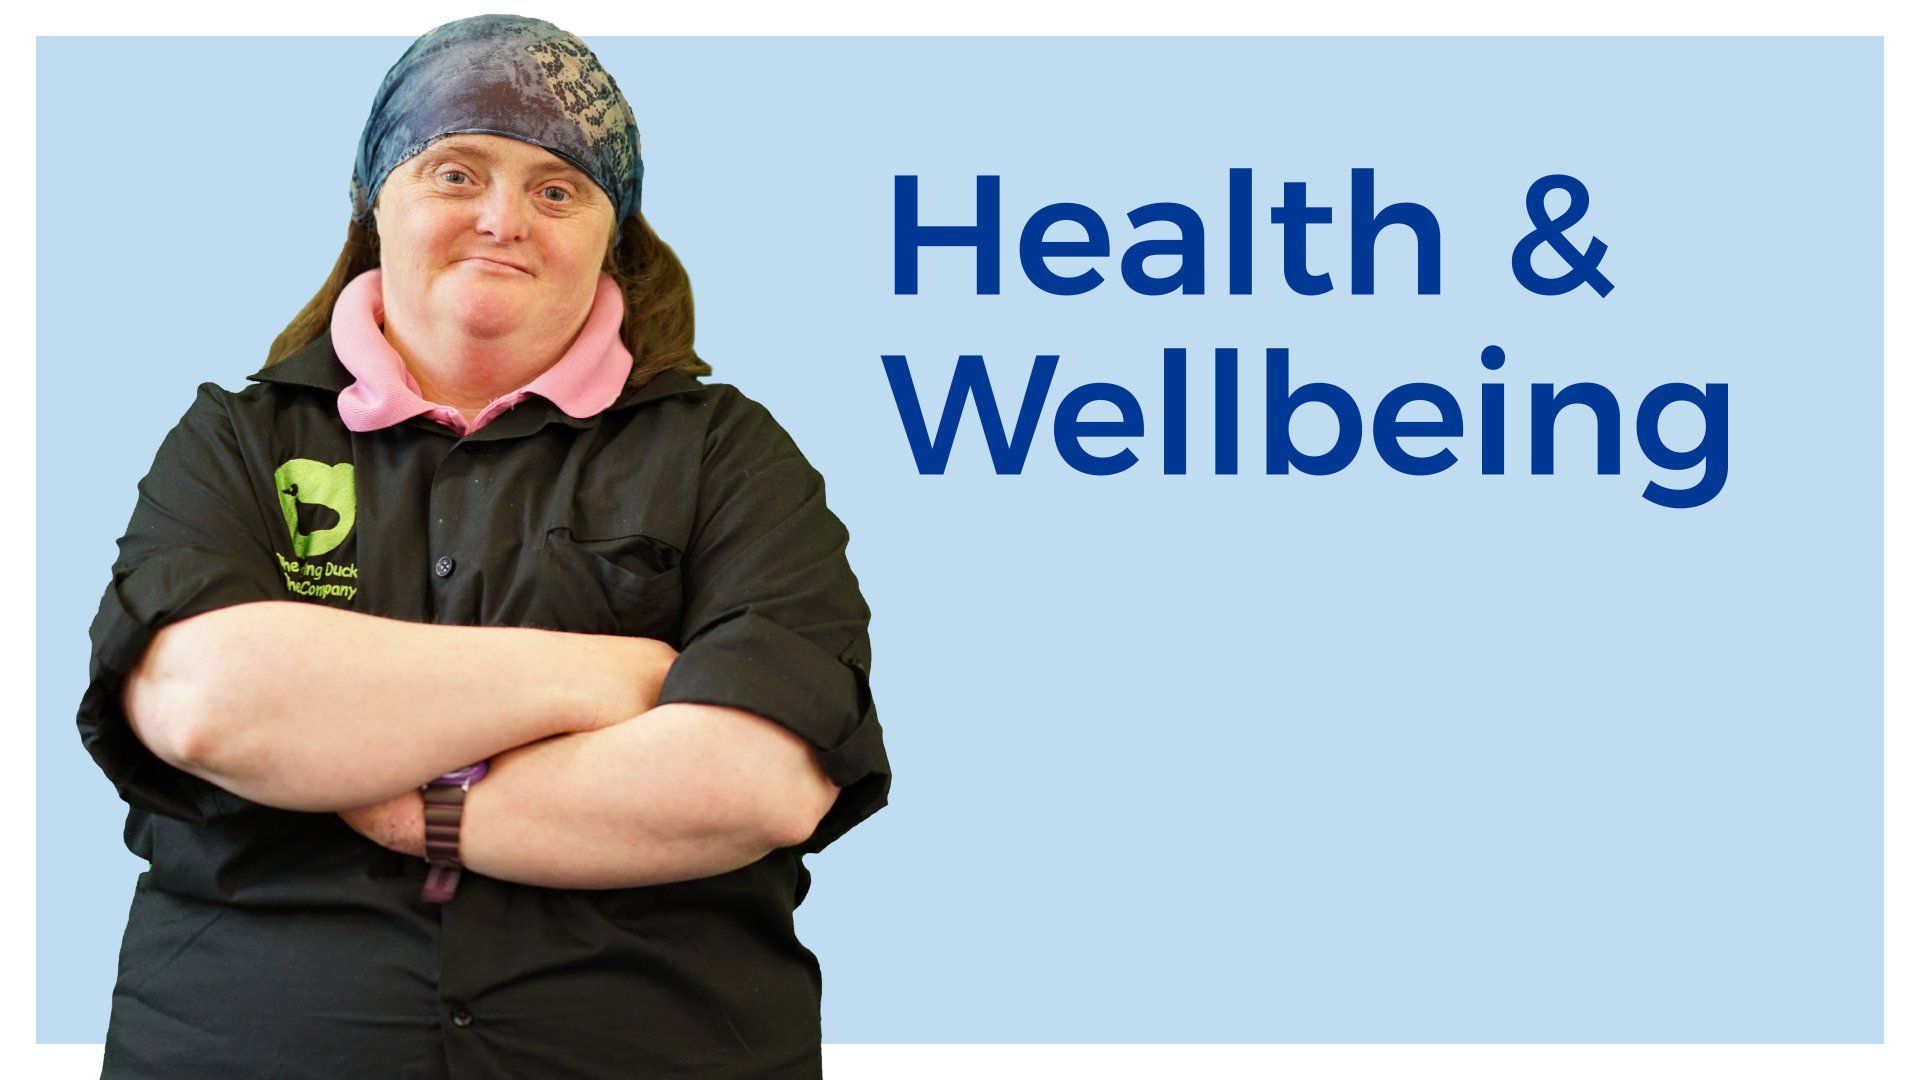 Text saying Health and wellbeing with a smiling person next to the text